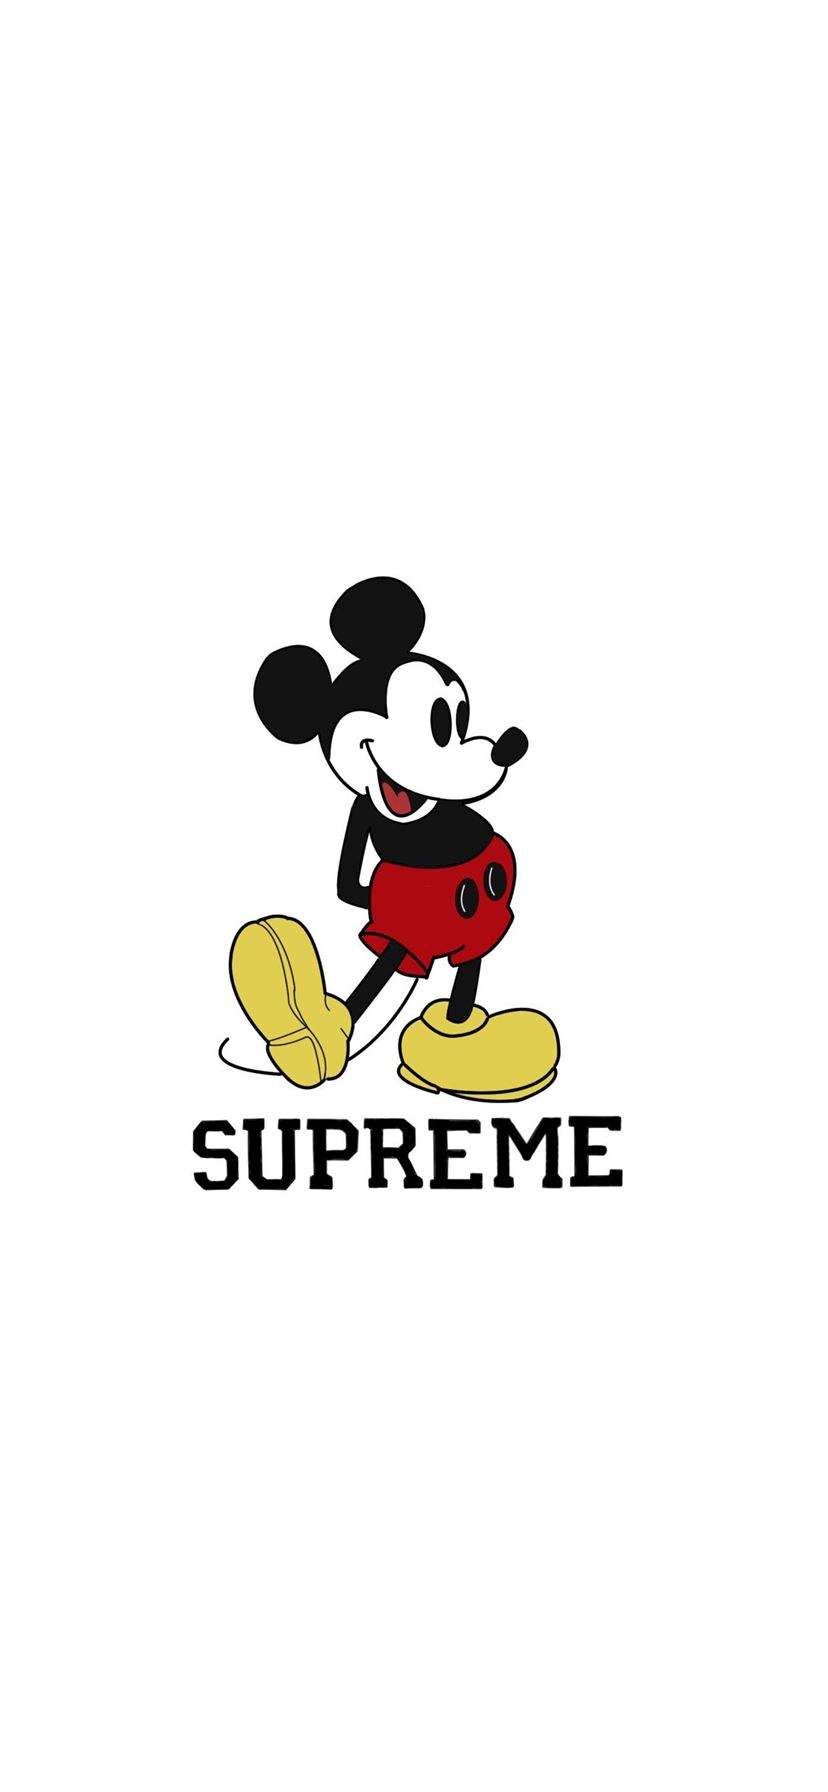 Supreme cave iphone wallpapers free download